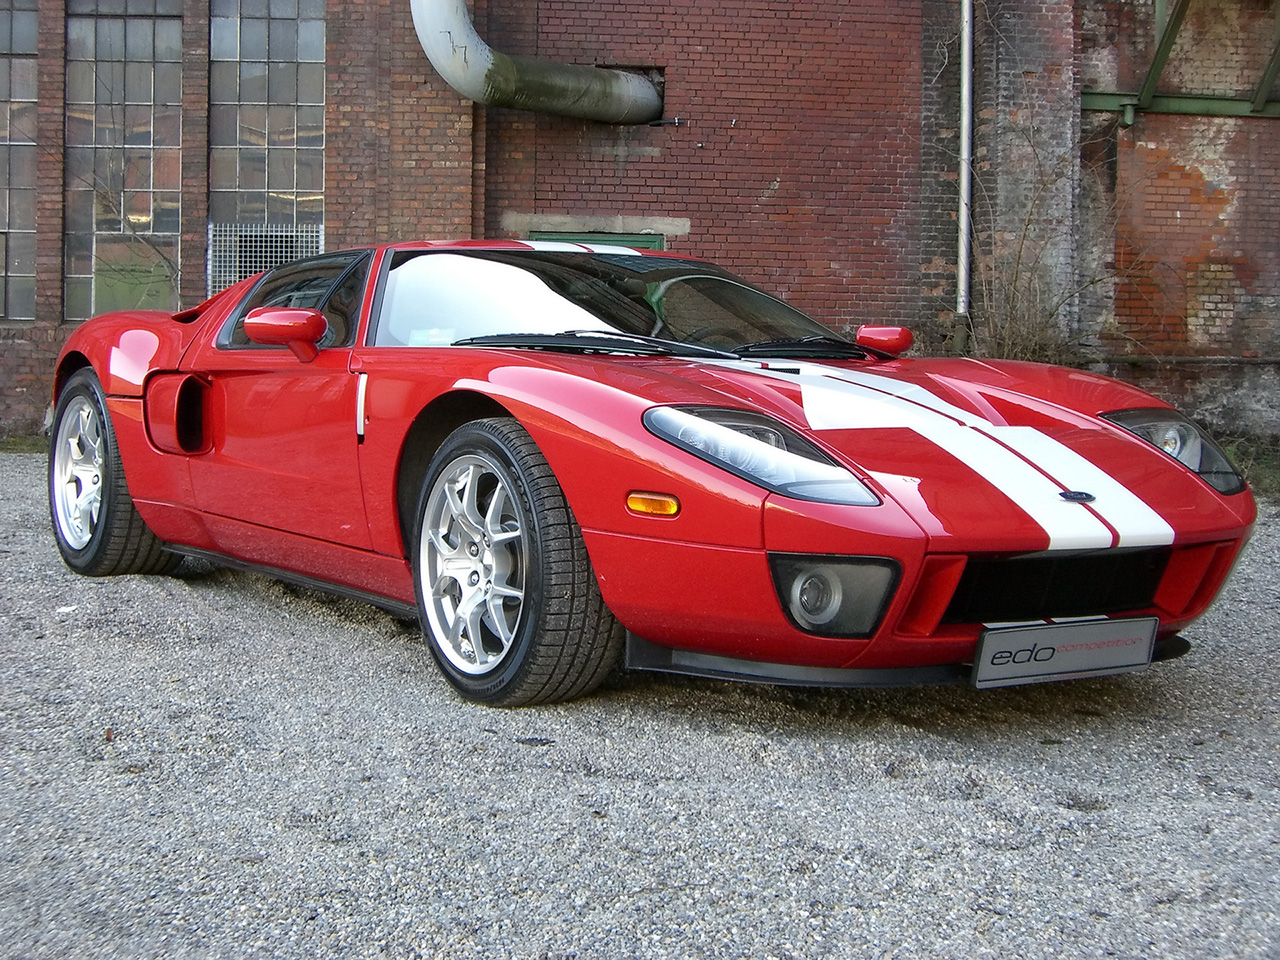 Ford gt screen savers #9